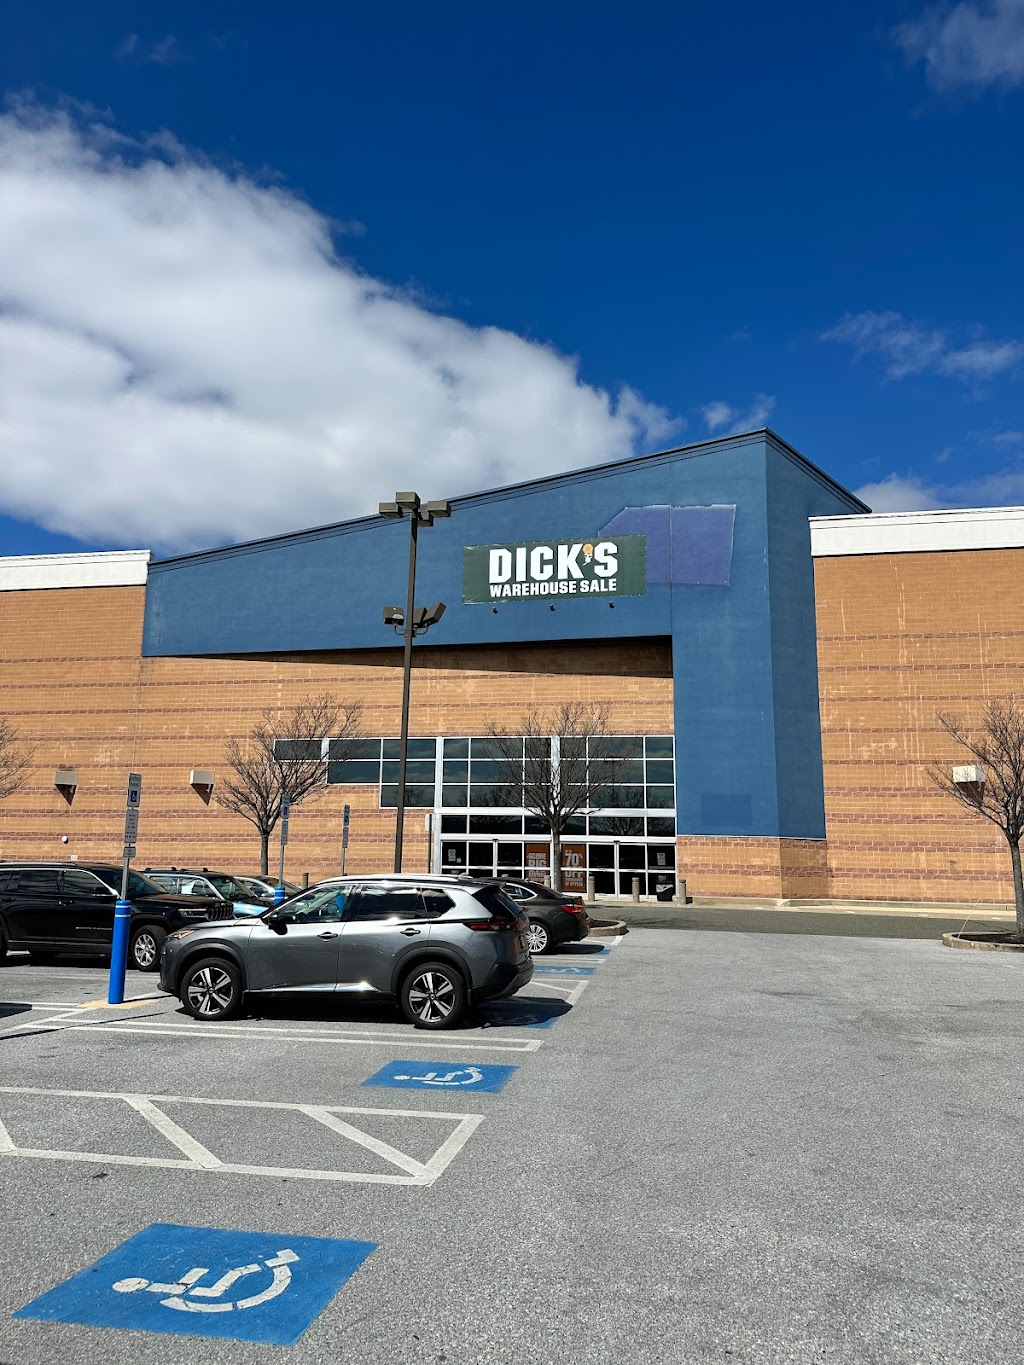 DICKS Warehouse Sale | 310 Goddard Blvd Suite 03, King of Prussia, PA 19406 | Phone: (412) 737-5336